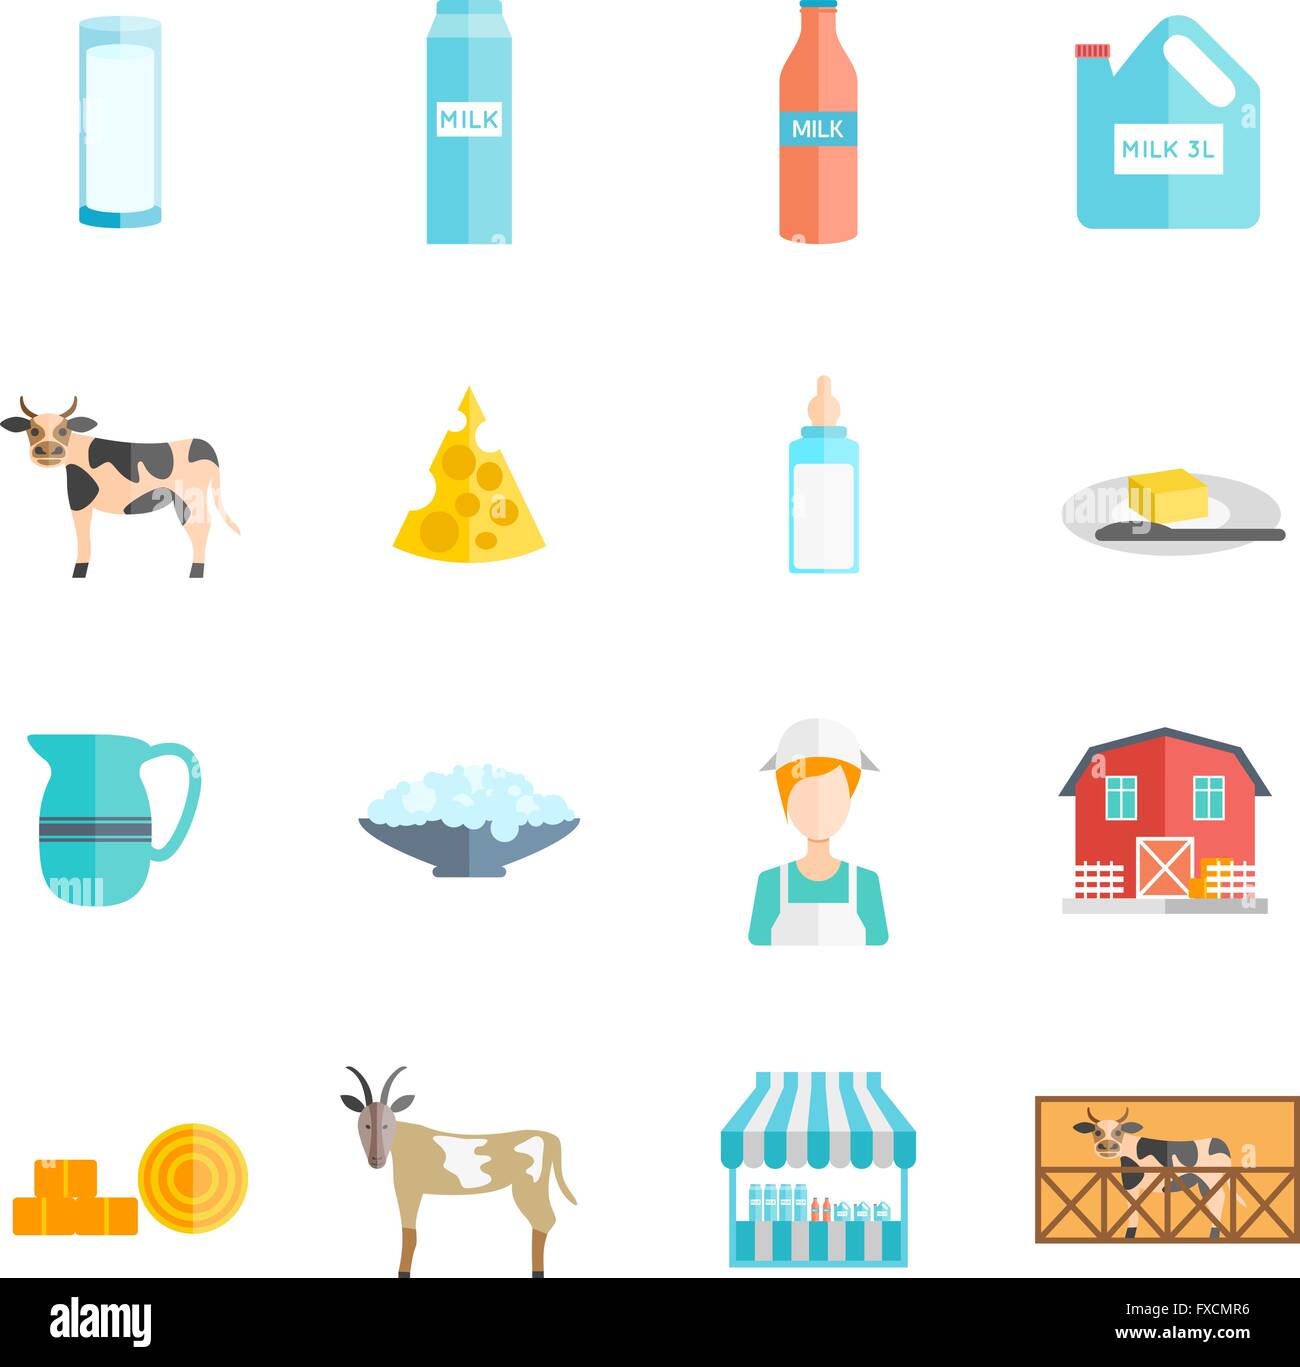 Milk dairy products flat icons set Stock Vector